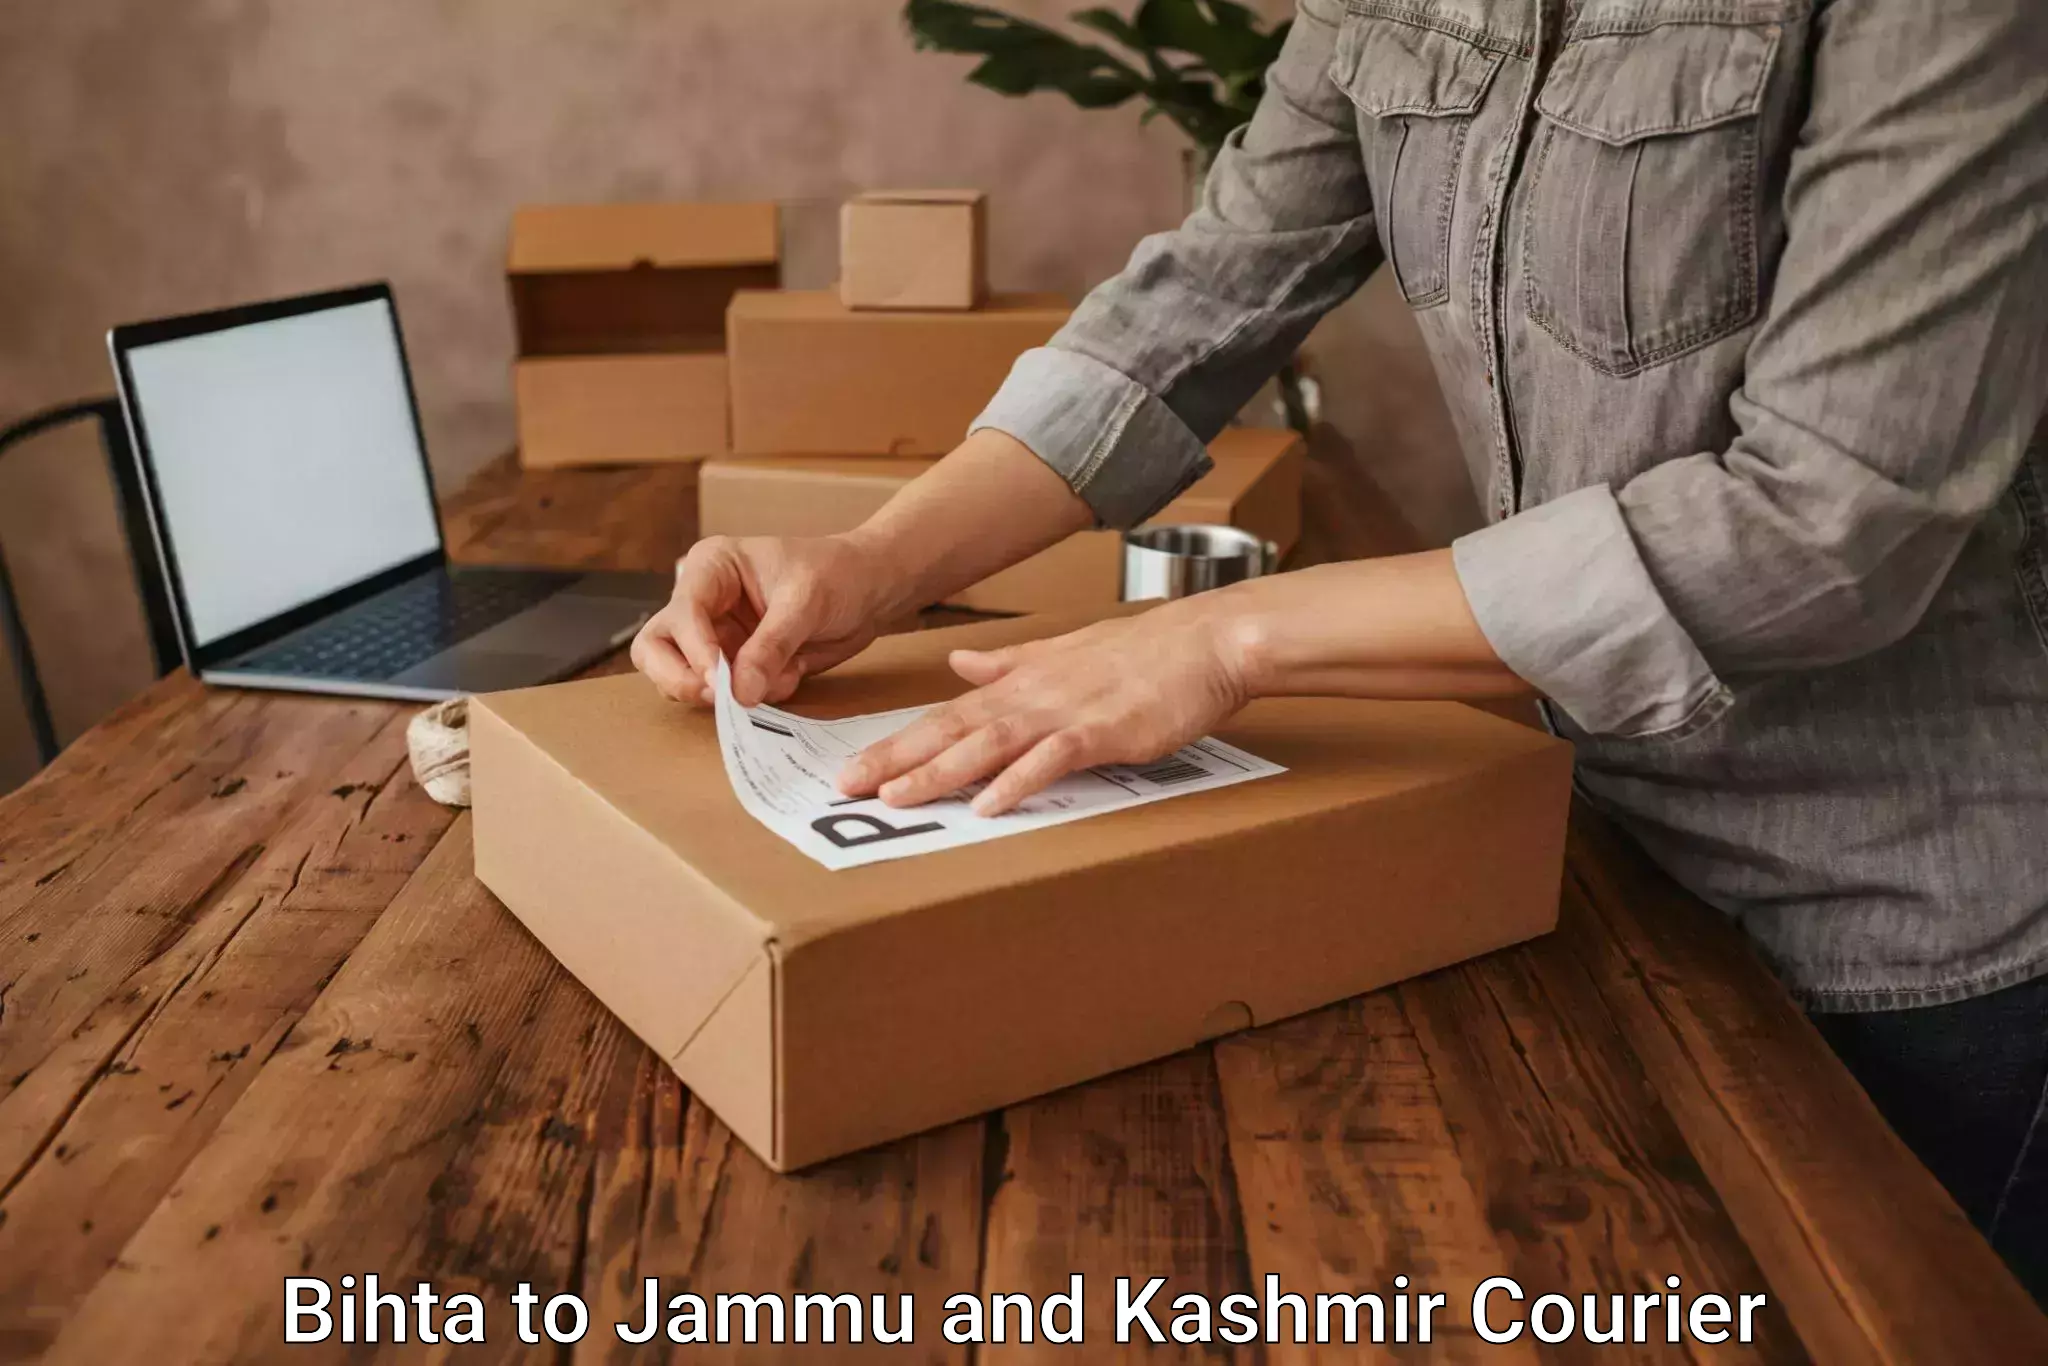 Personalized relocation plans in Bihta to Jammu and Kashmir